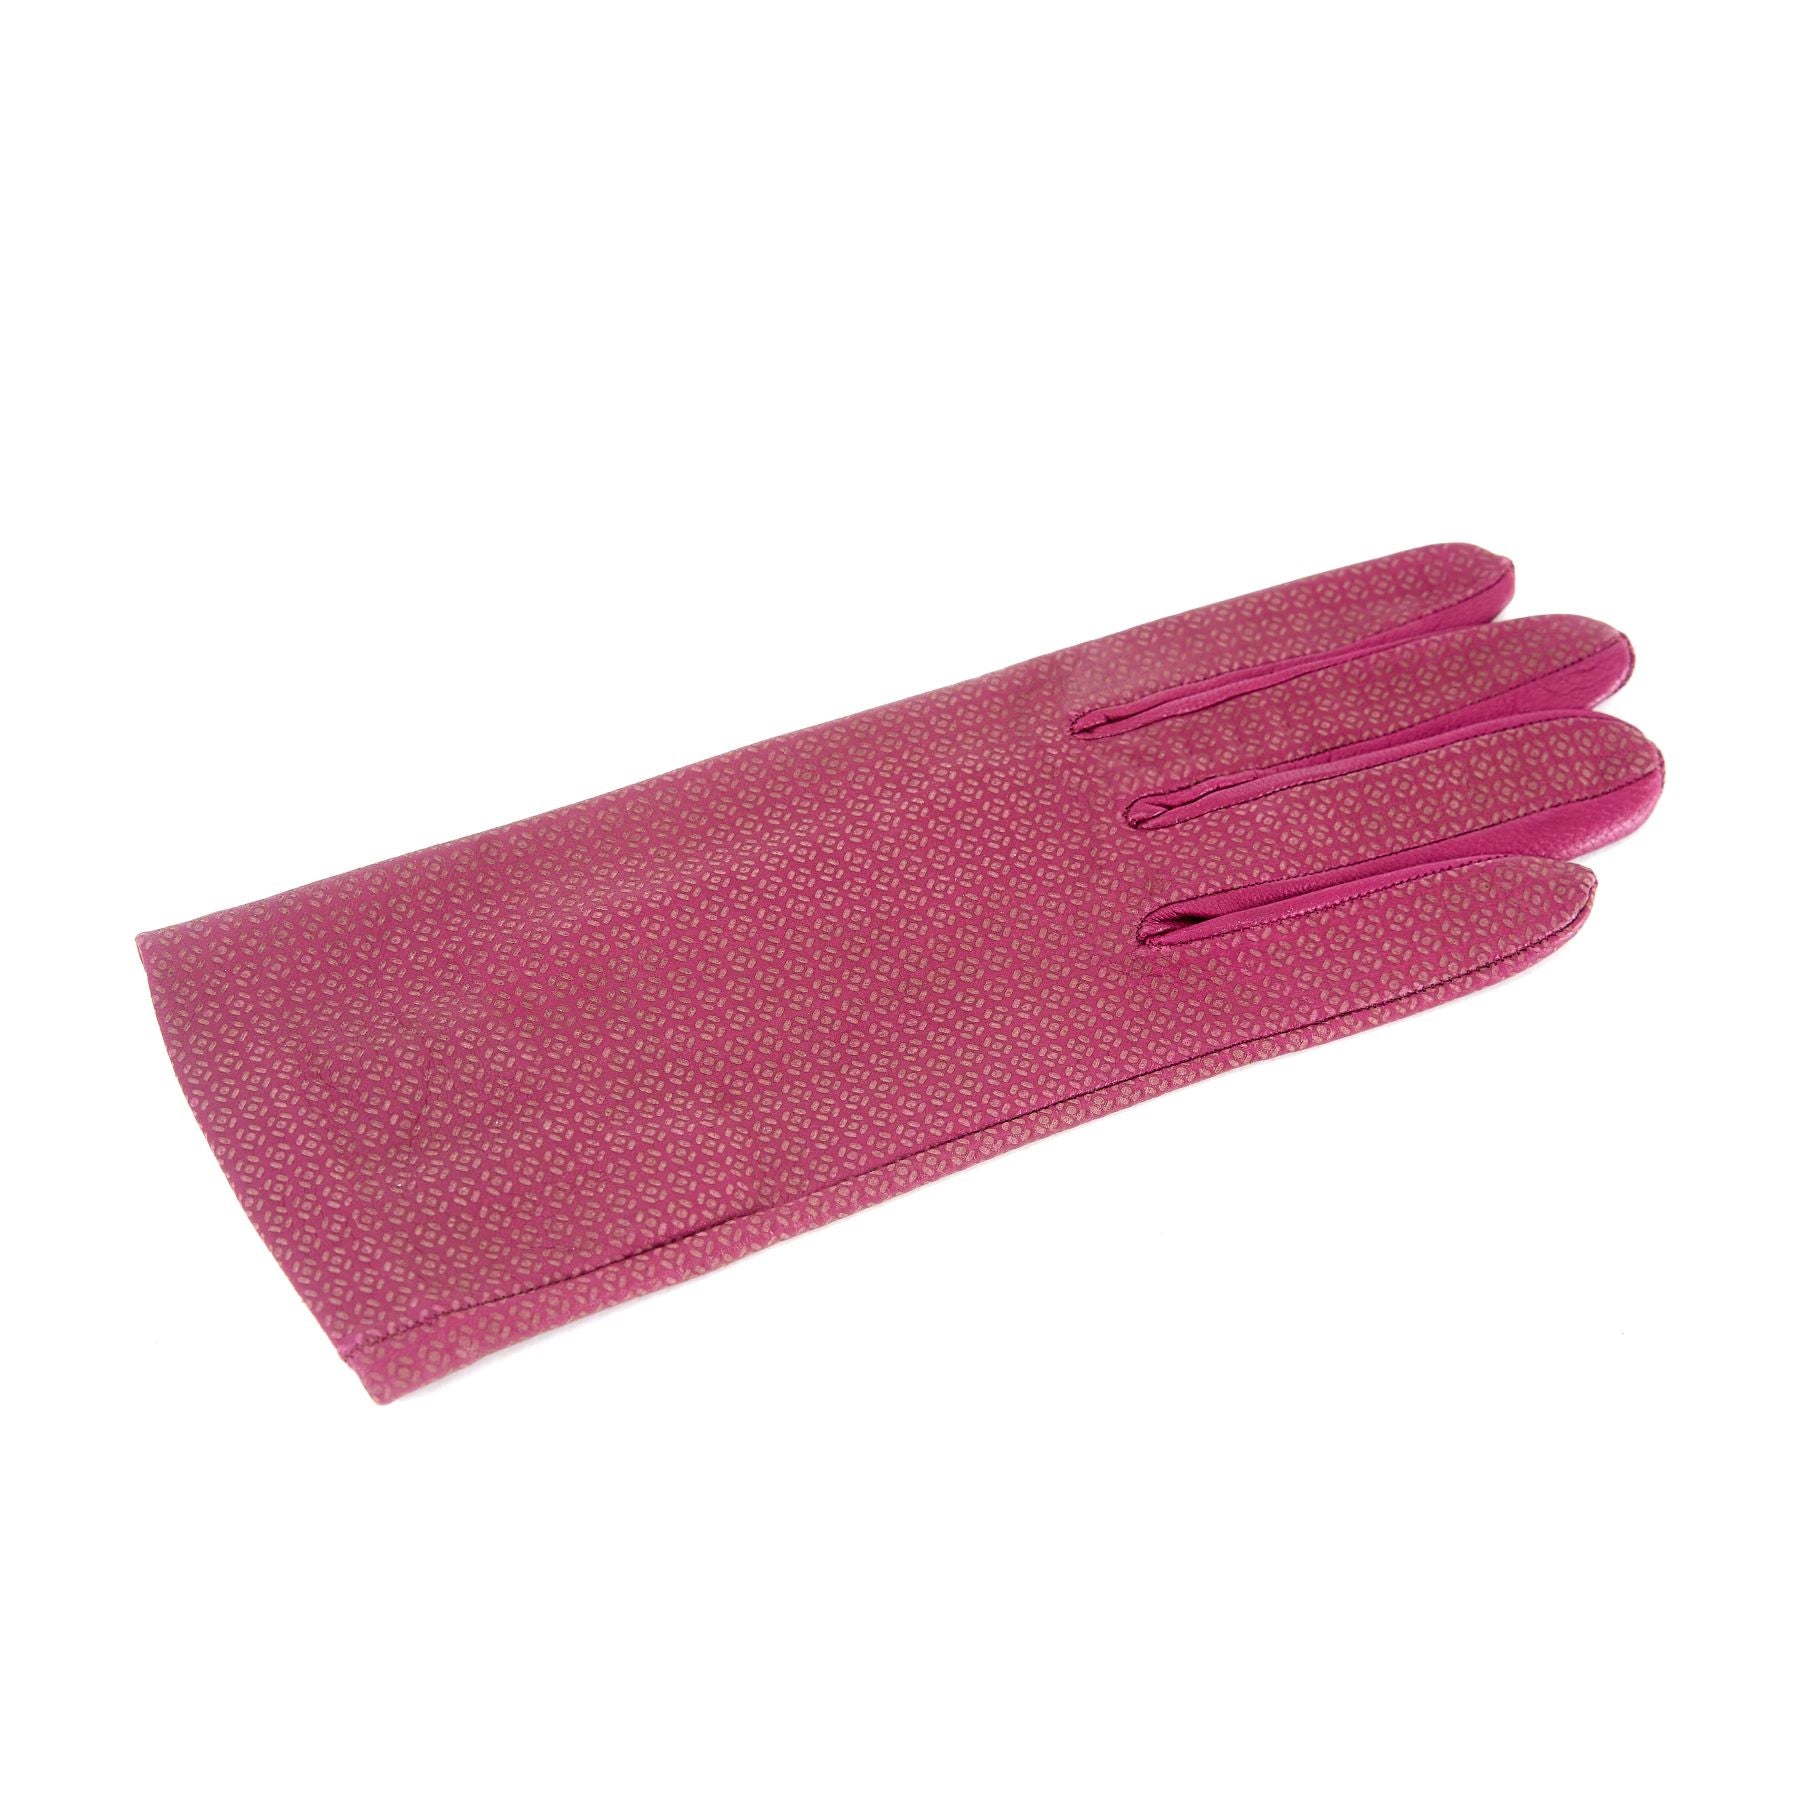 Women's unlined purple nappa leather gloves with all over laser cut detail